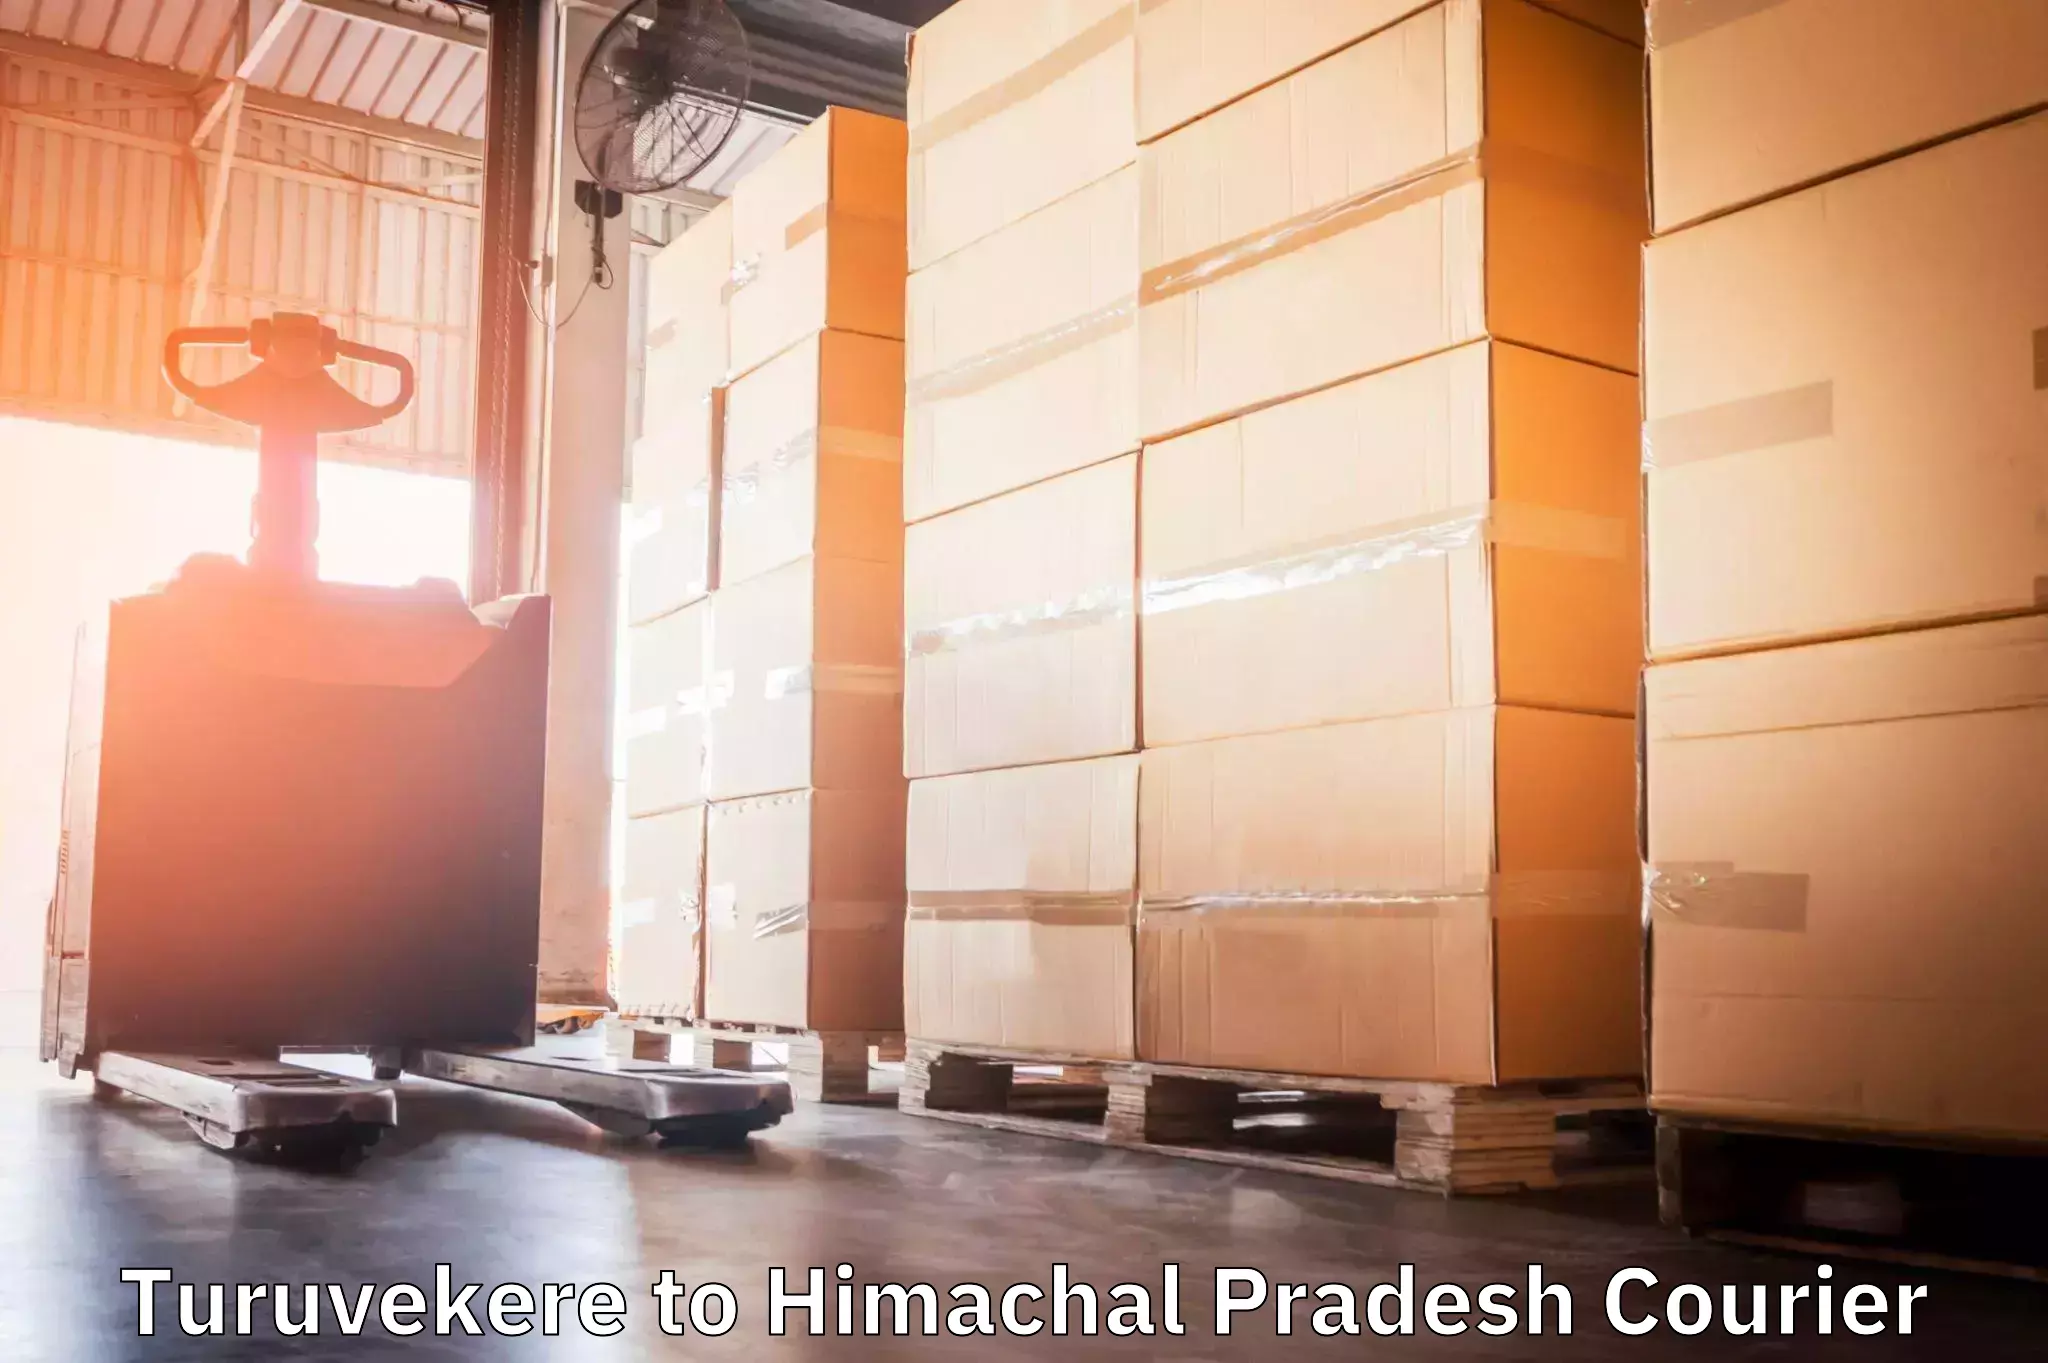 Round-the-clock parcel delivery Turuvekere to Himachal Pradesh